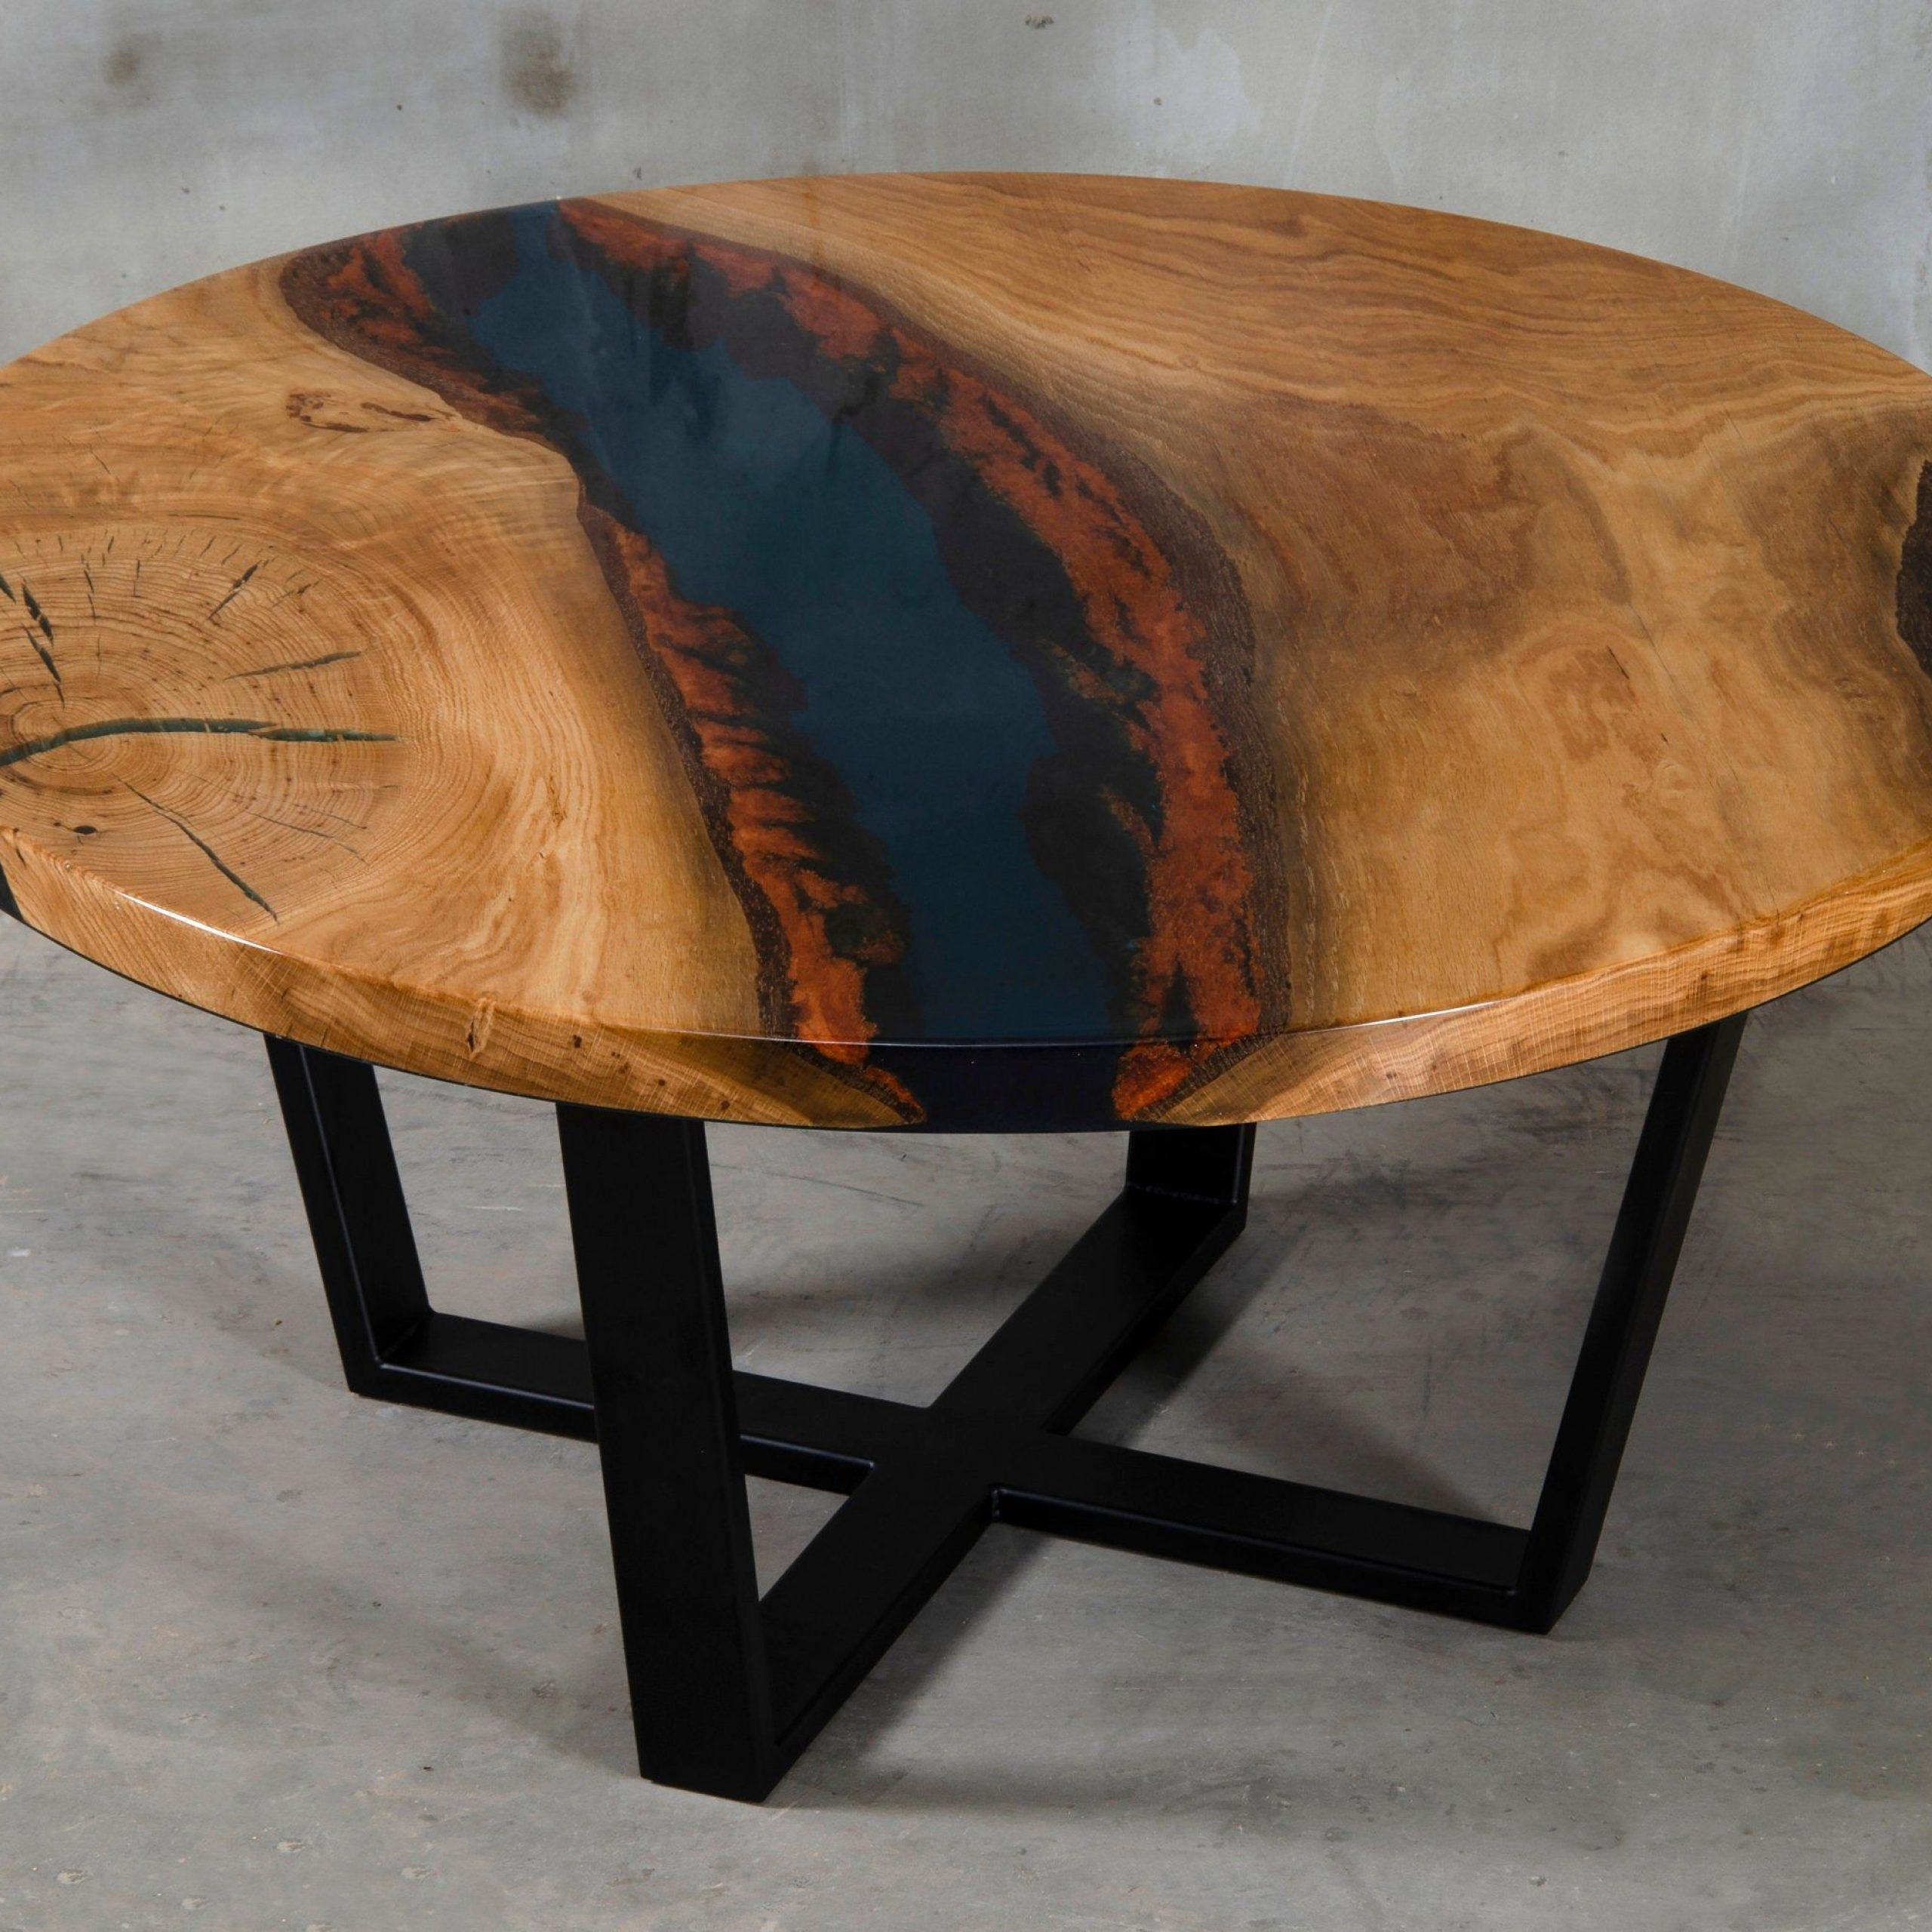 Custom Resin Table Made Of Oak, Dark Blue Uv Resin, Wooden Live Edge With Regard To Metal Legs And Oak Top Round Console Tables (View 5 of 20)